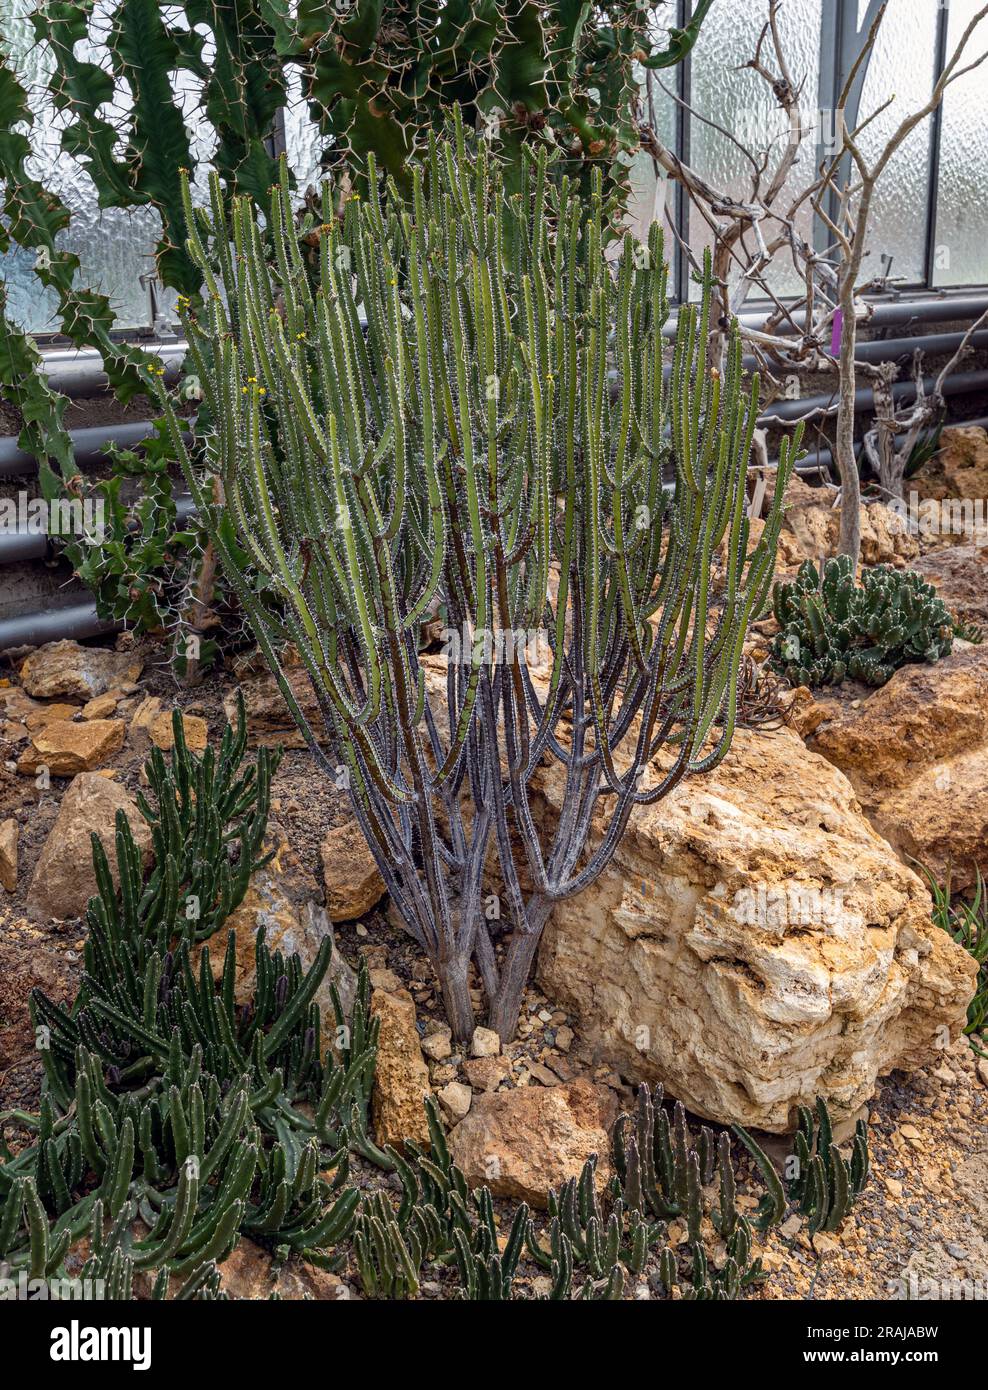 Euphorbia lydenburgensis is a much branched, spiny, cactus-like, succulent shrub with characteristic thin branchlets. Endemic to South Africa Stock Photo